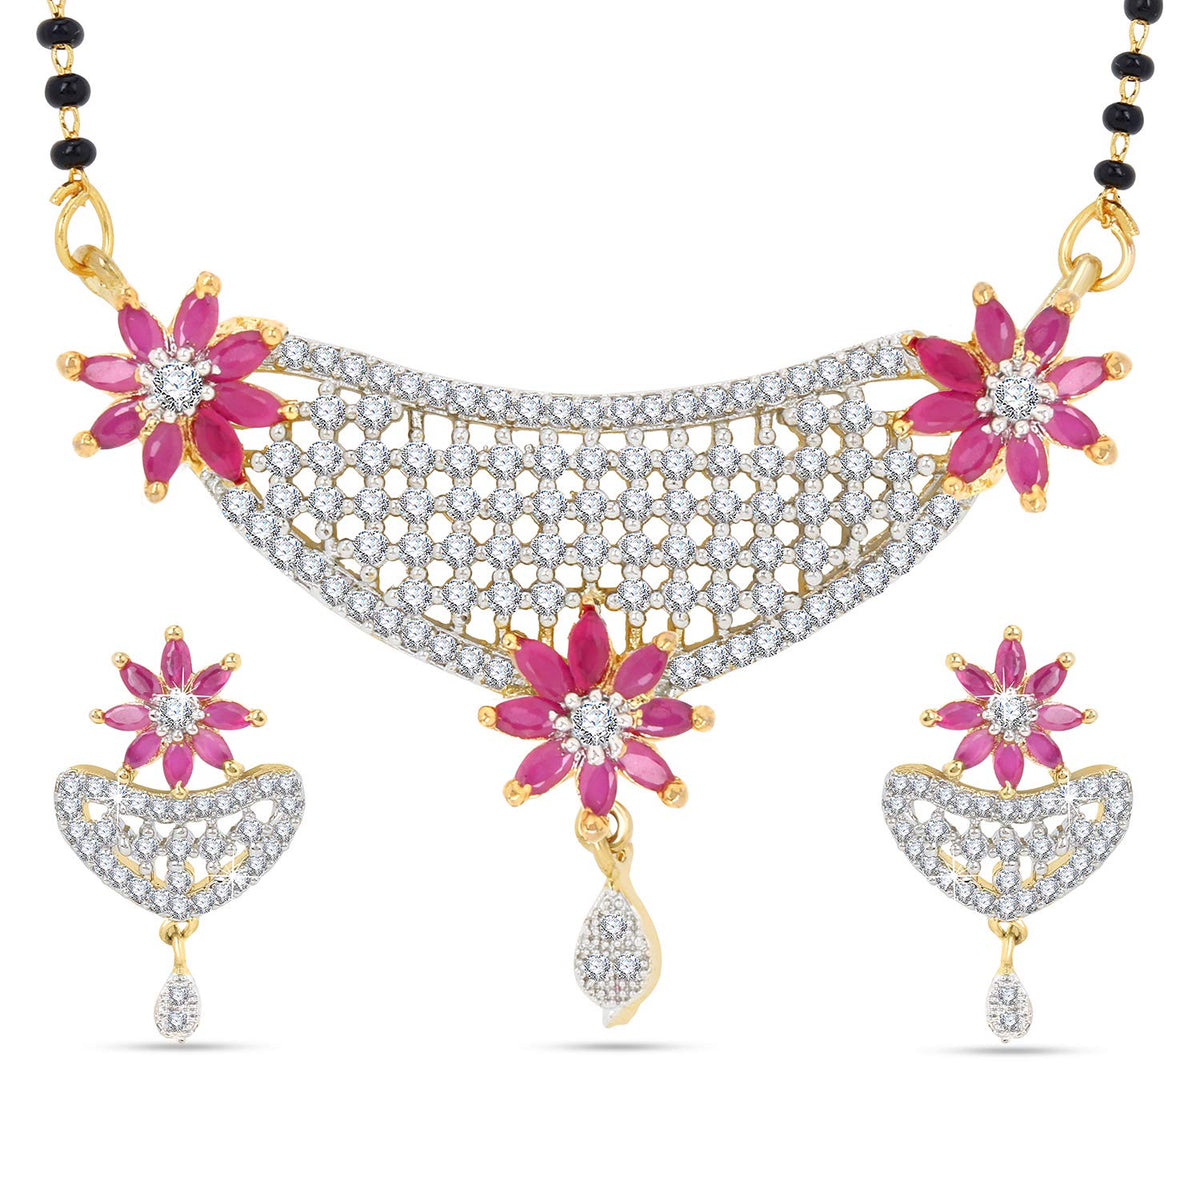 Yellow Chimes Classic Pink AD/American Diamond Studded Black Beads Designer Floral Mangalsutra Set with Earrings for Women